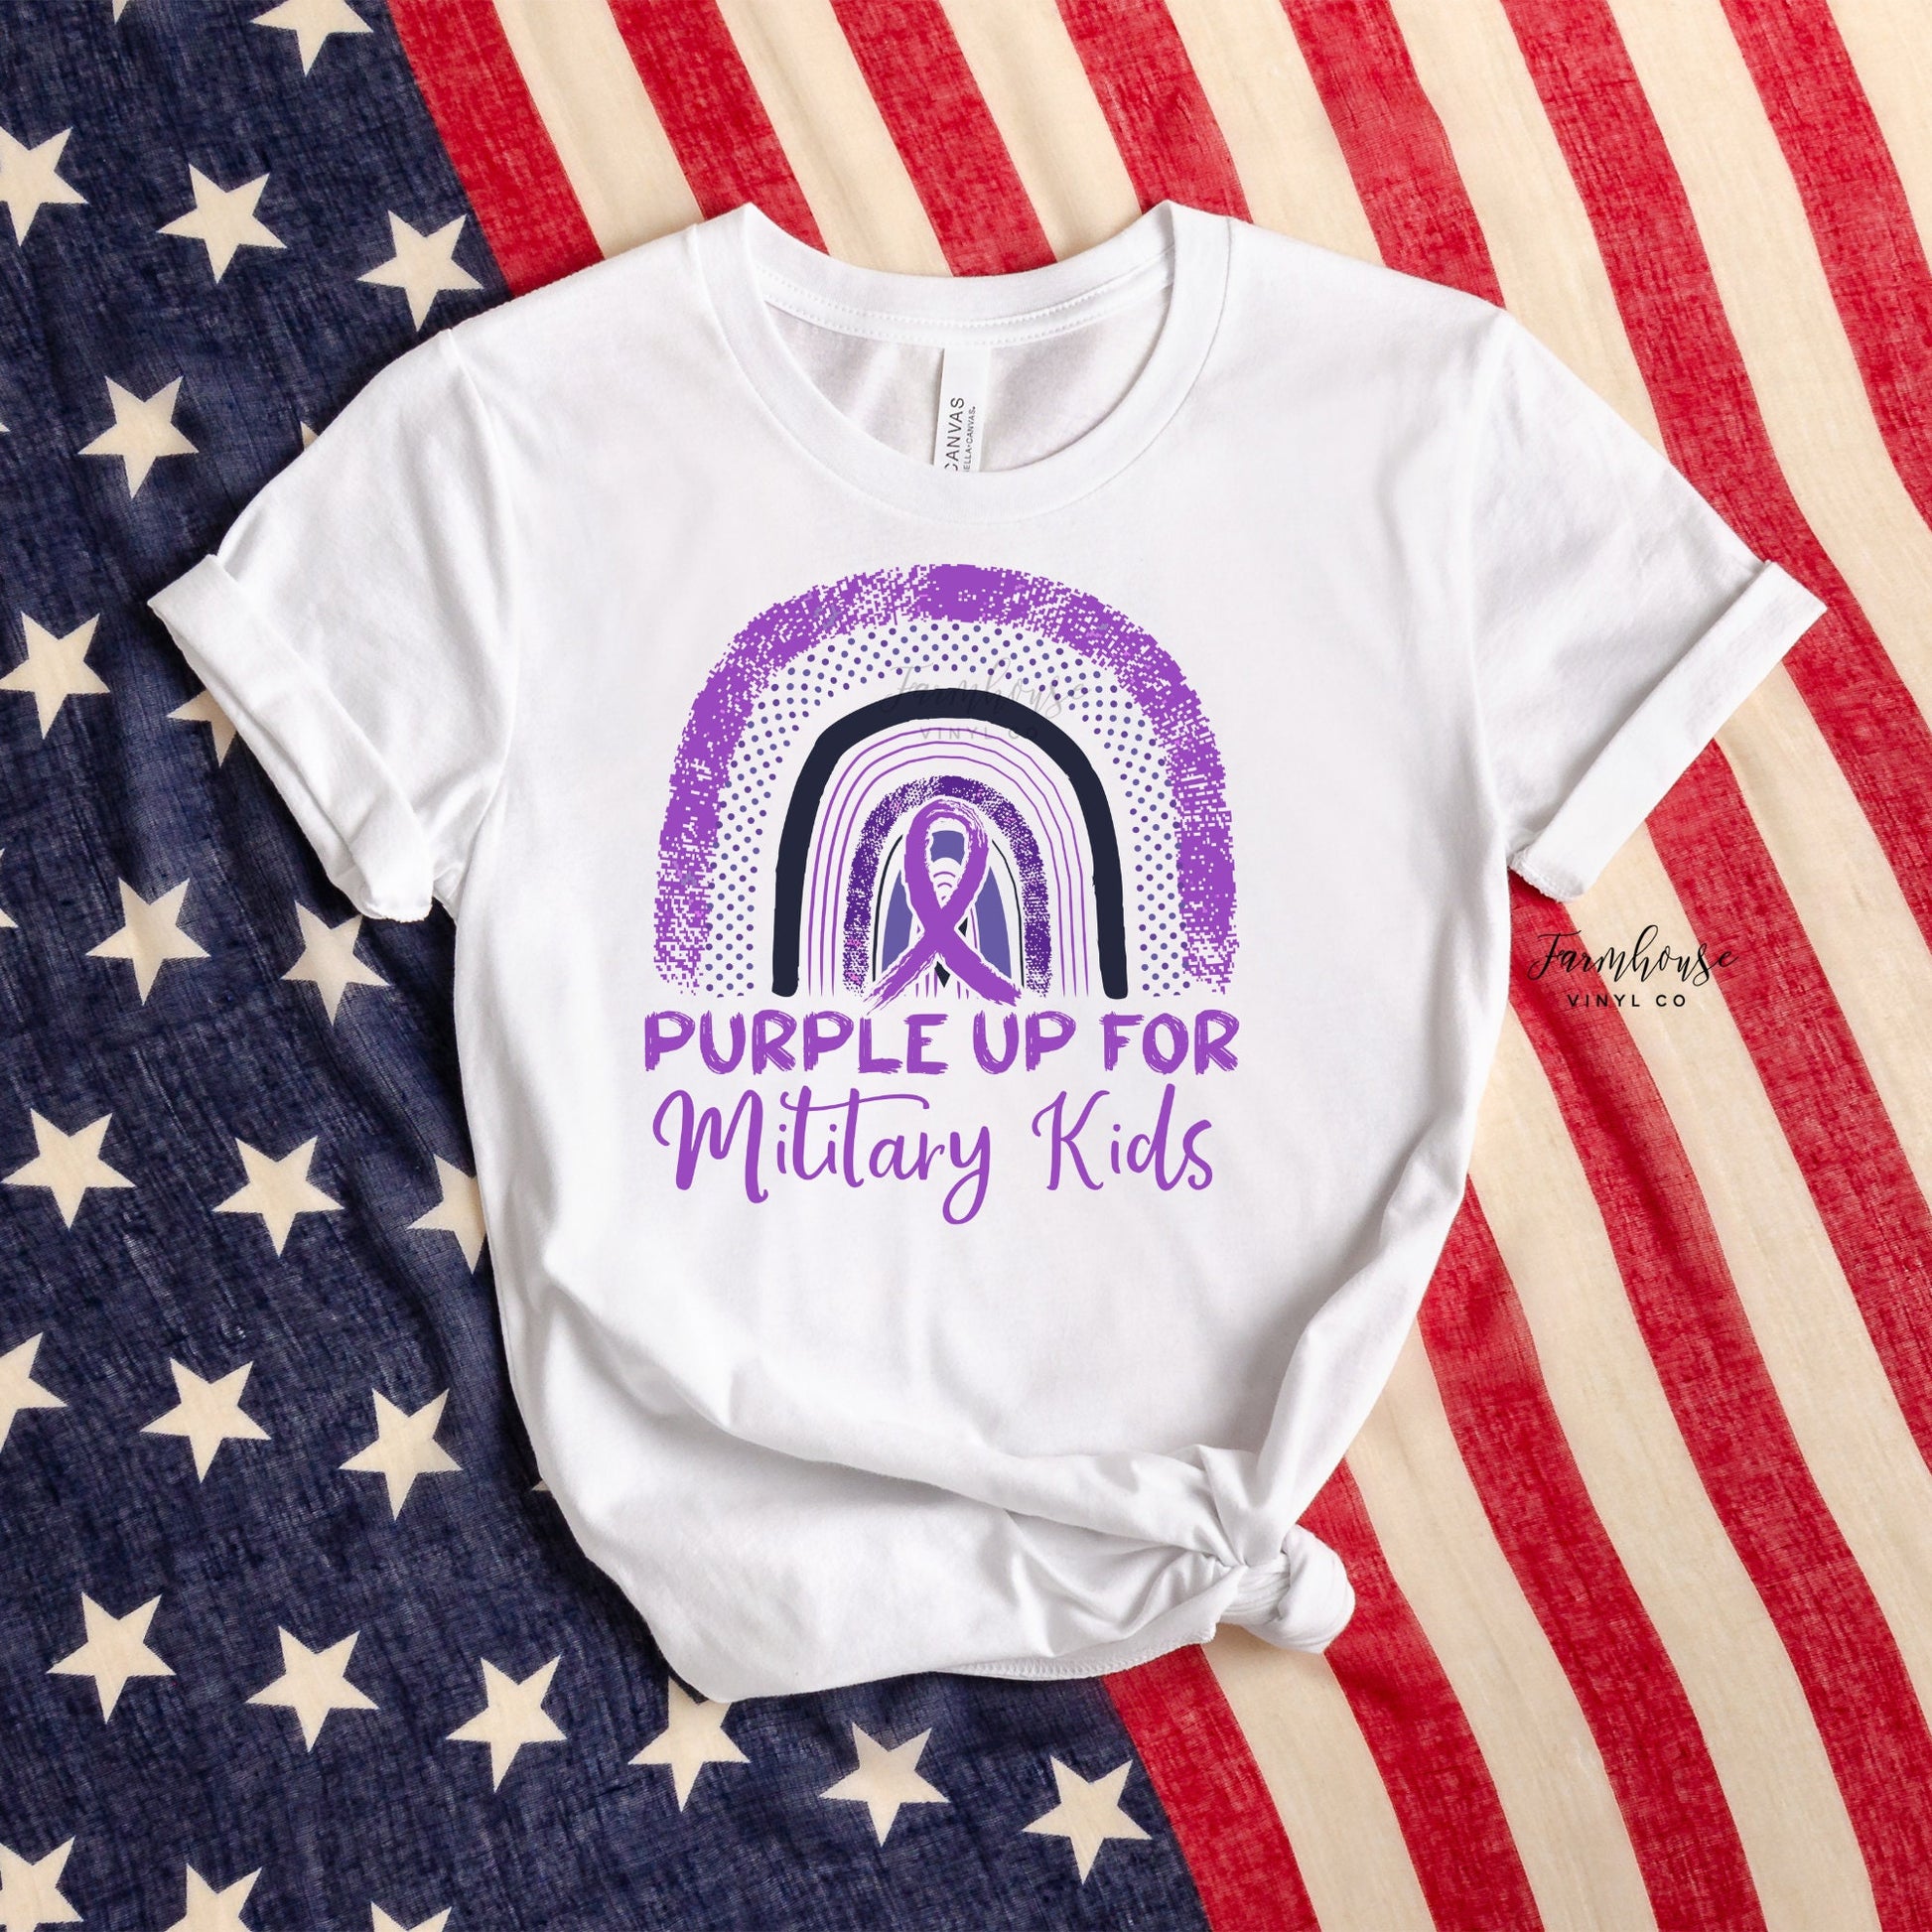 Purple Up Military Kids Rainbow / Month of the Military Child Shirt / Military Families / Military Deployment / Veteran Owned / Military Tee - Farmhouse Vinyl Co